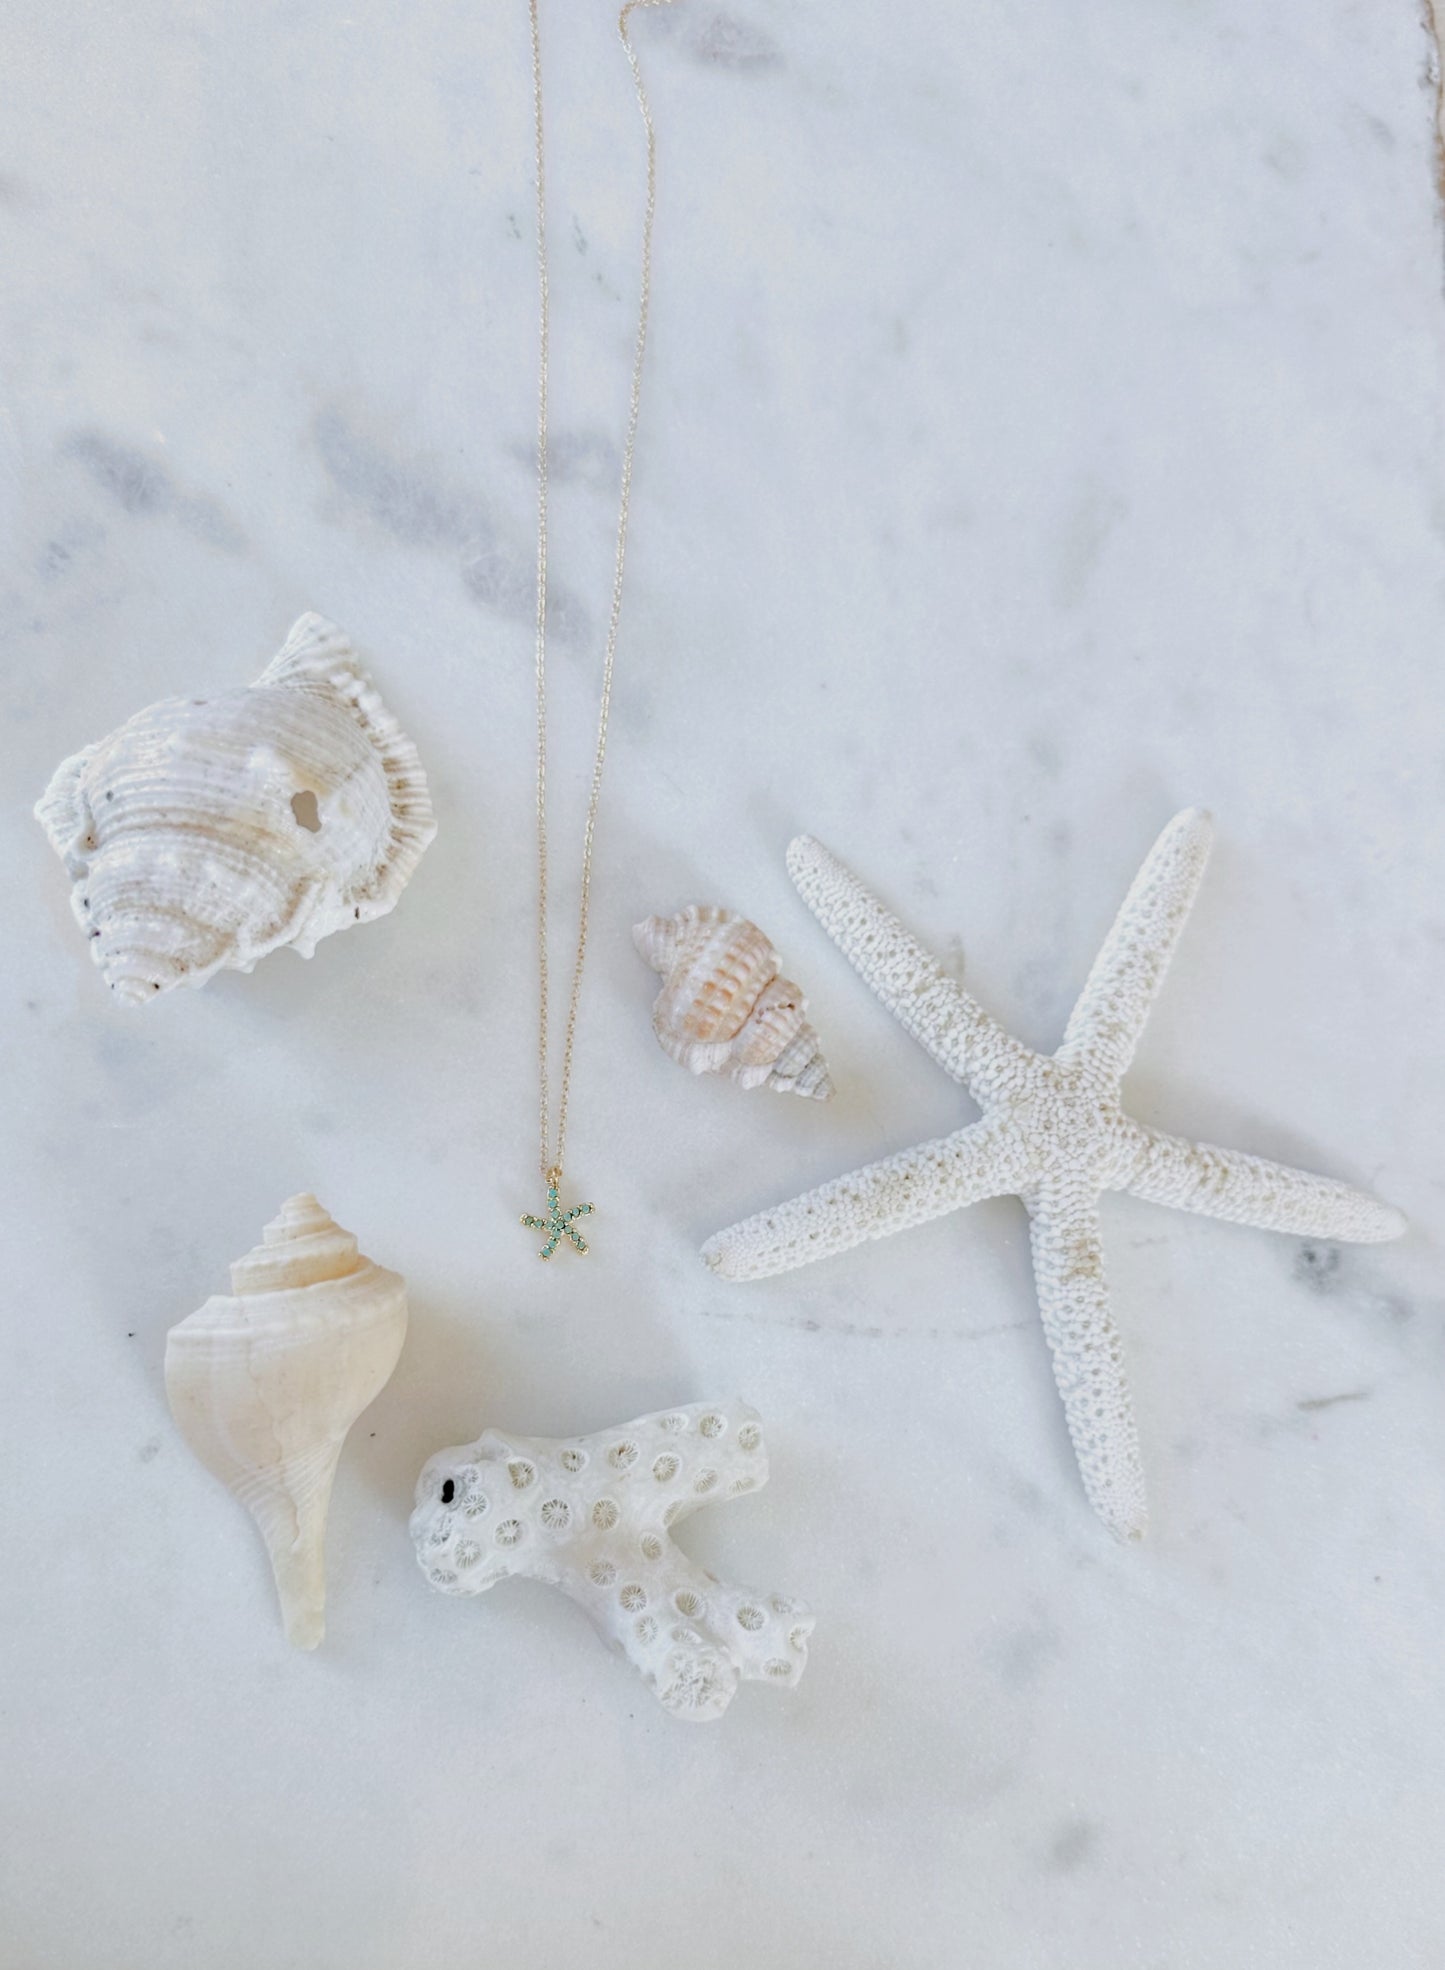 Dainty turquoise gem paved gold starfish necklace